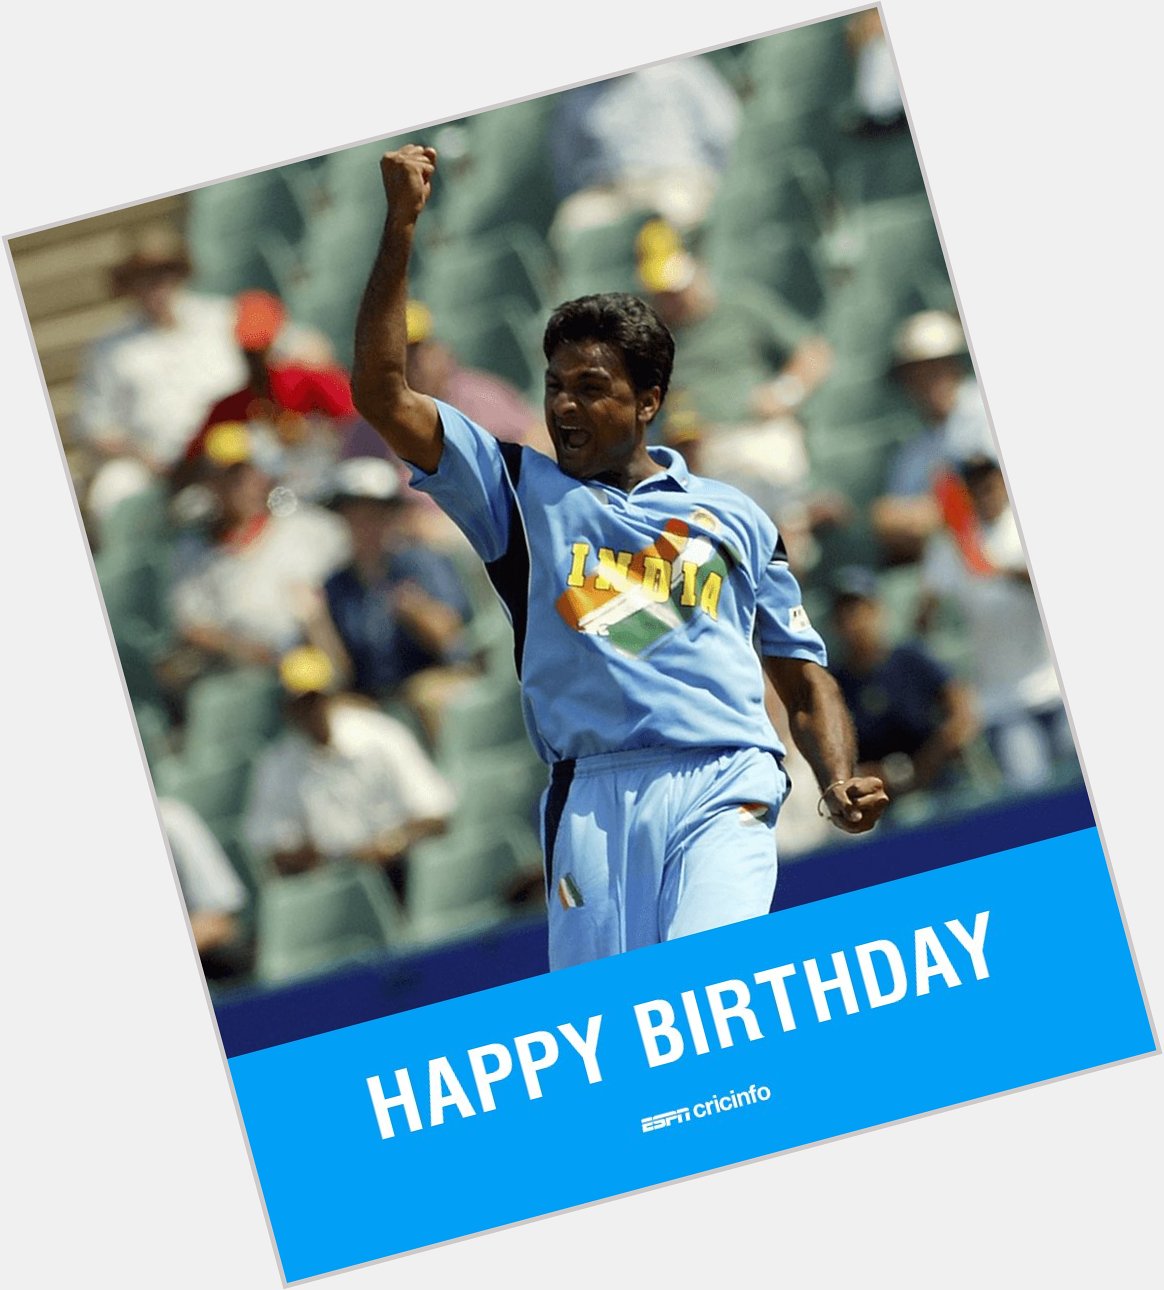   Happy birthday to Javagal Srinath! 

Your favourite India fast bowler?  